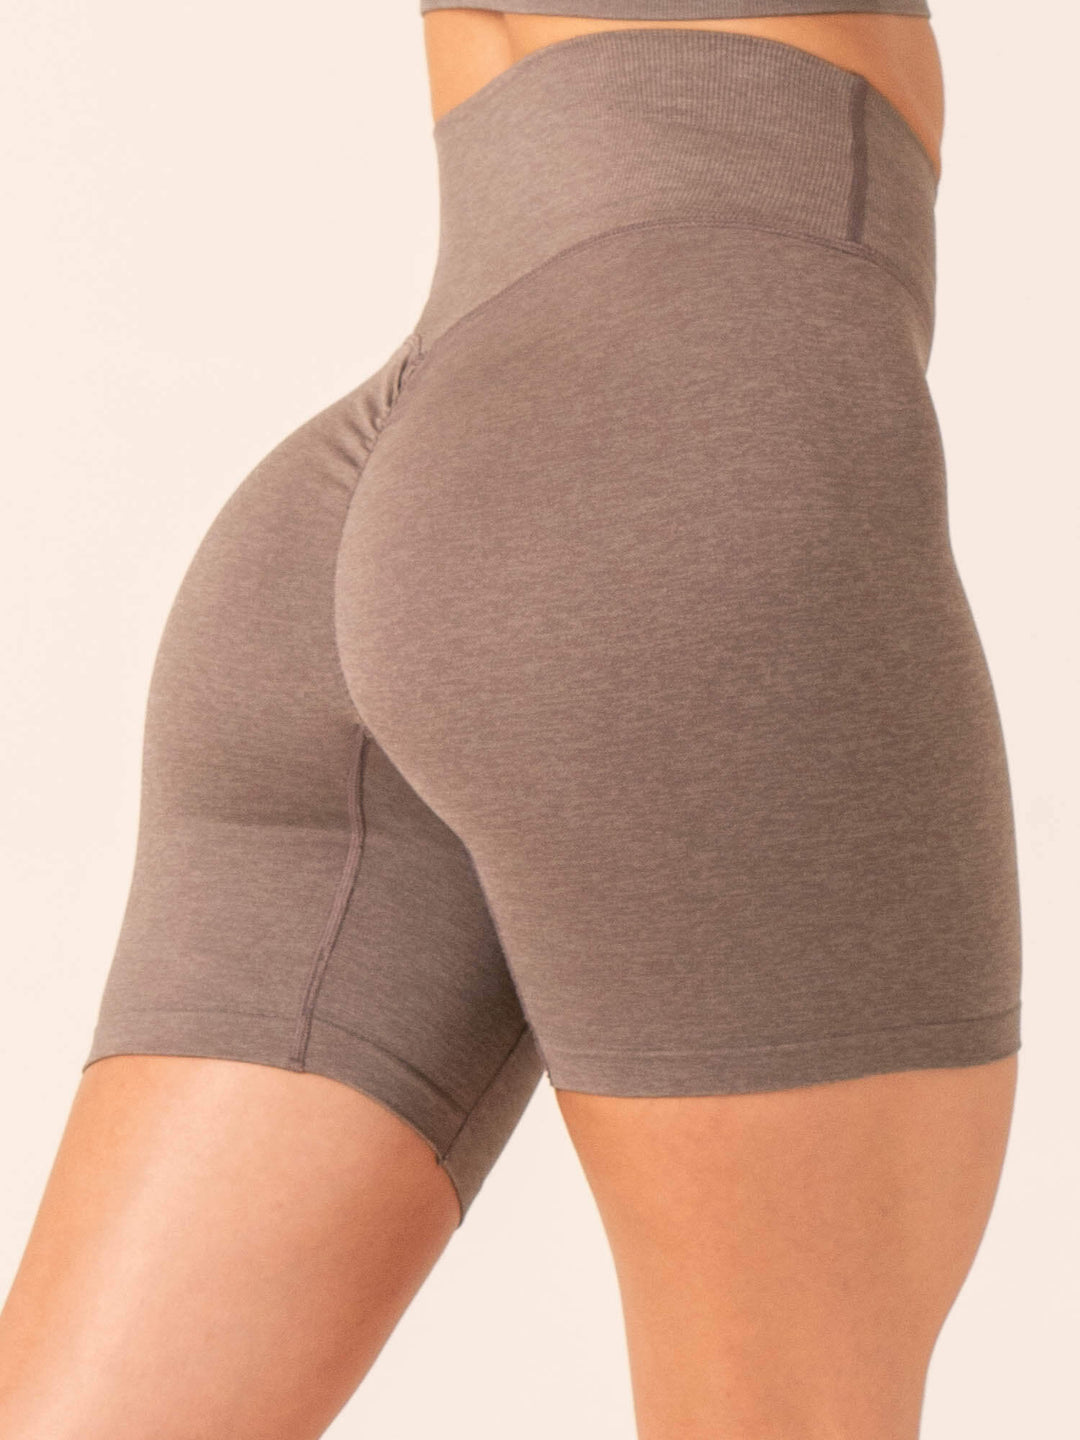 Focus Scrunch Seamless Shorts - Taupe Marl Clothing Ryderwear 